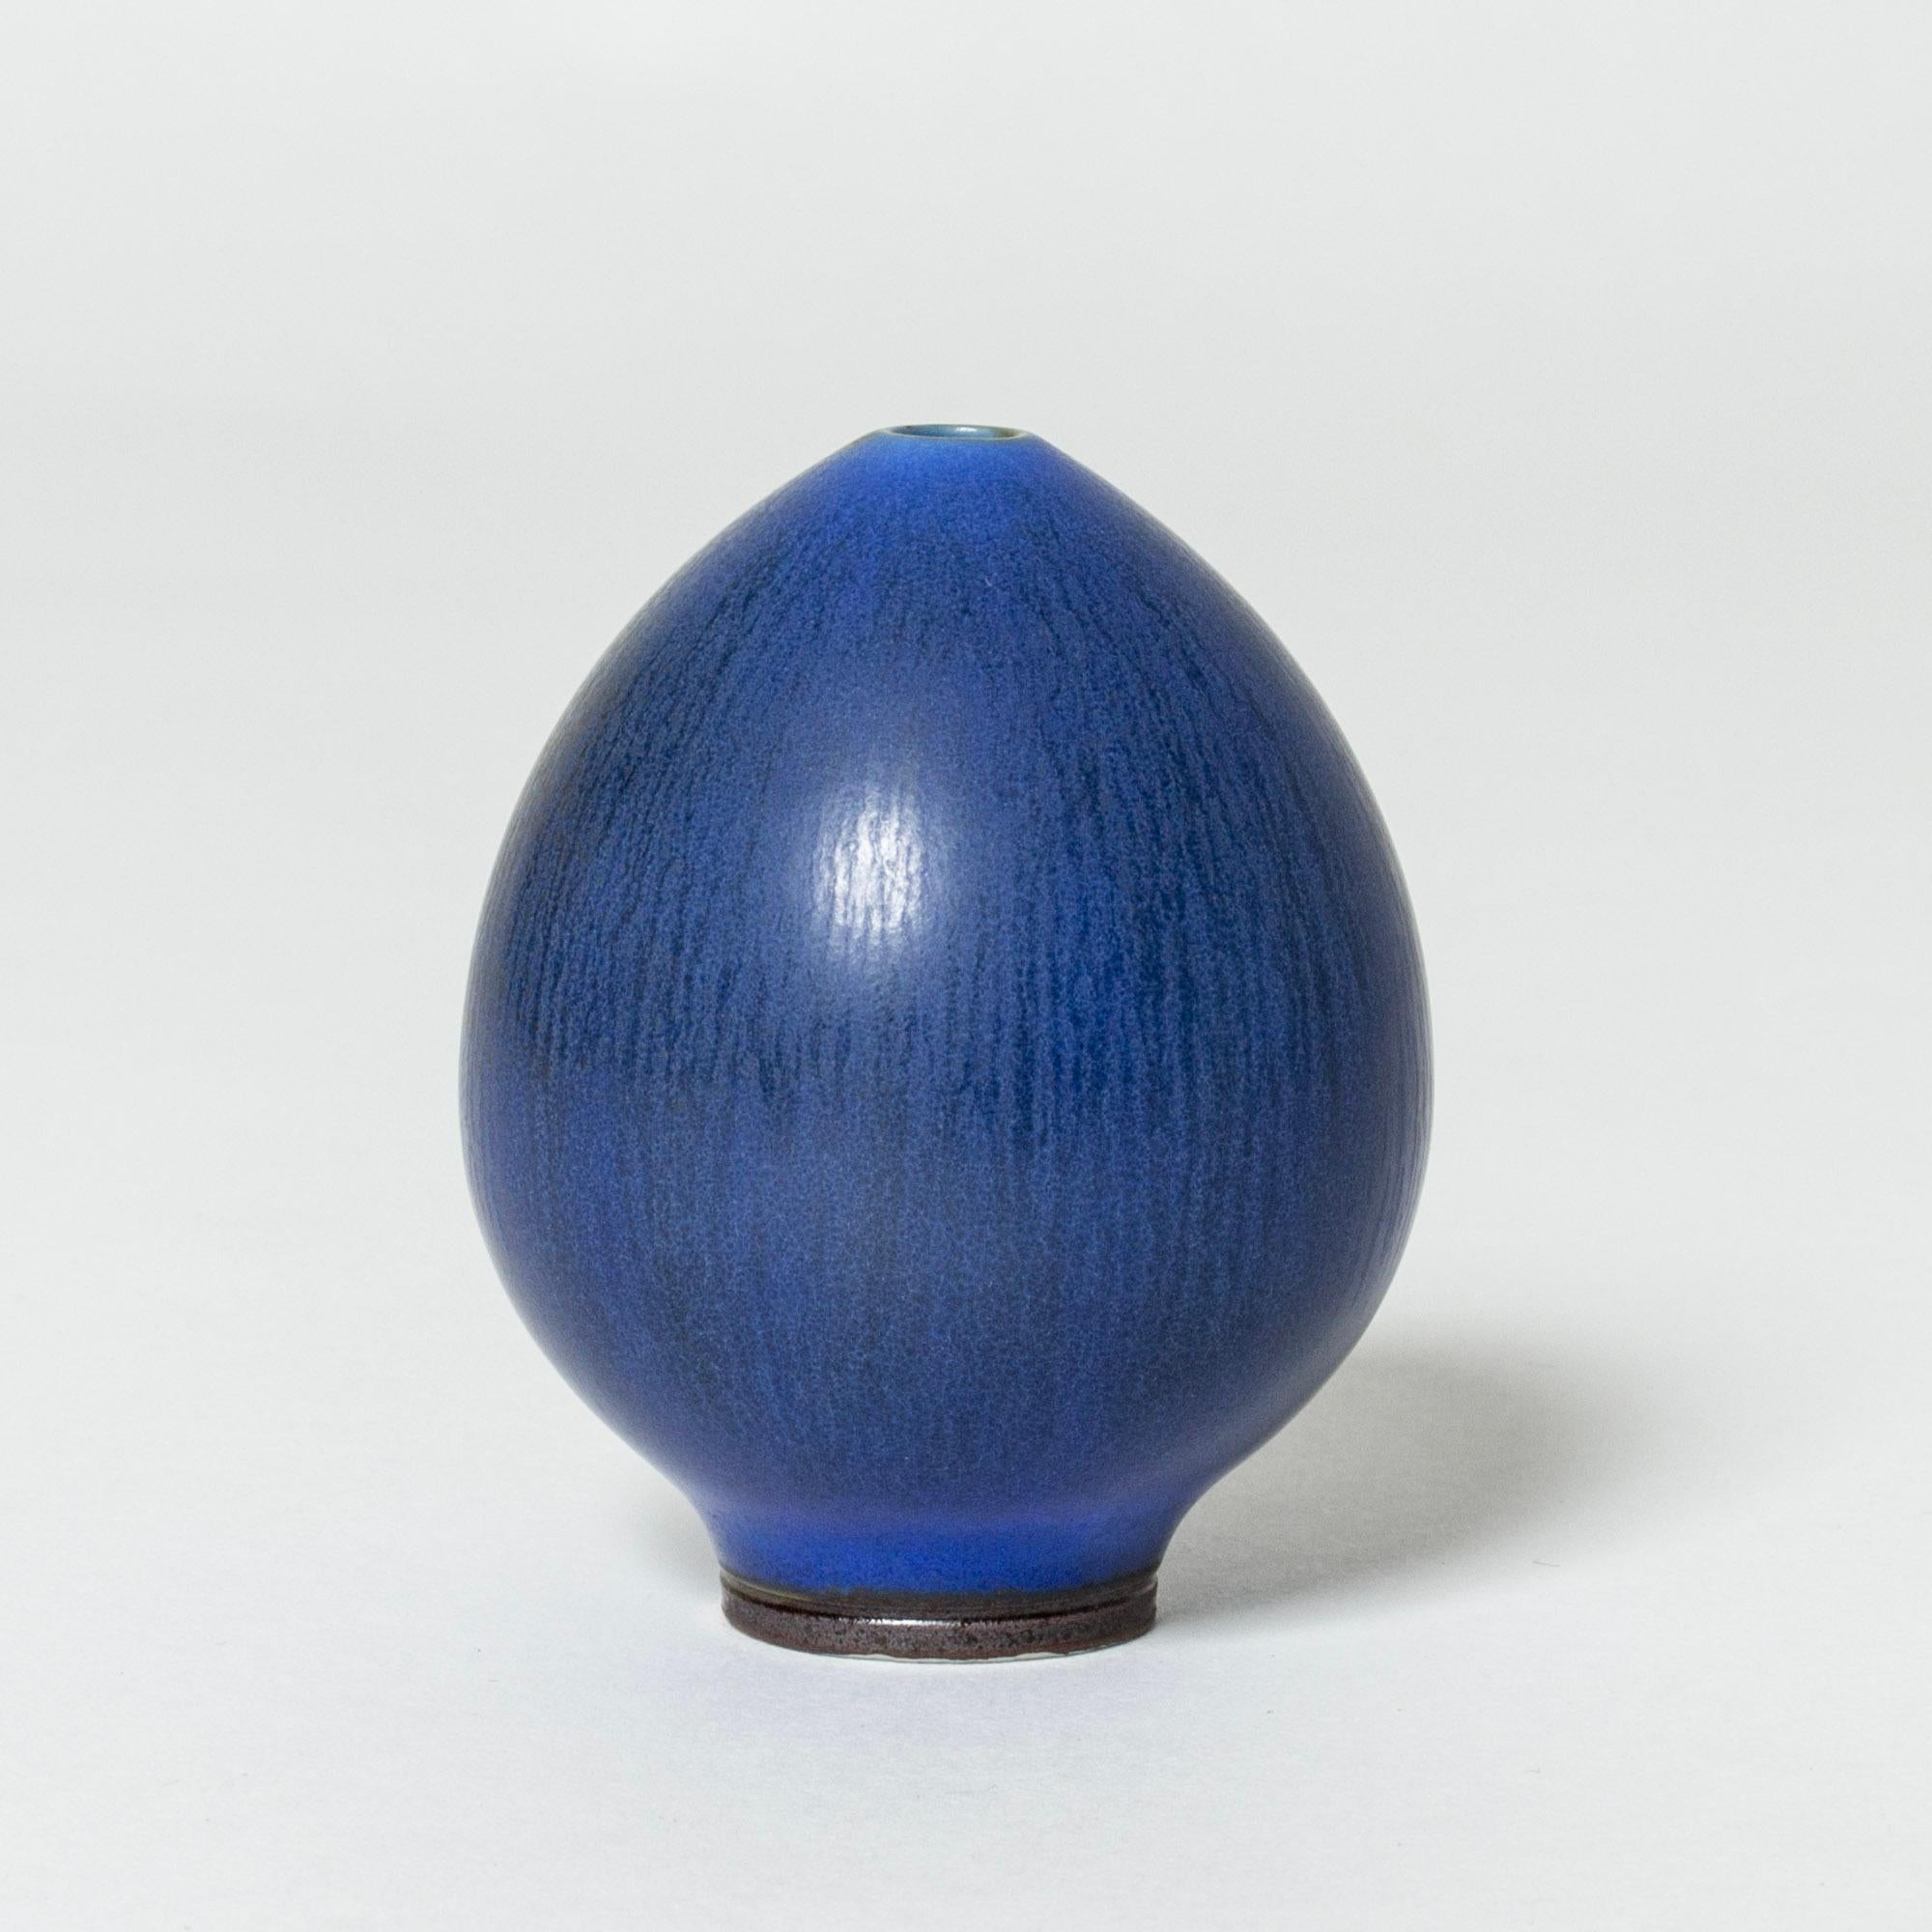 Lovely, small stoneware vase by Berndt Friberg, in the form of an egg. Beautiful, intense blue hare’s fur glaze.

Berndt Friberg was a Swedish ceramicist, renowned for his stoneware vases and vessels for Gustavsberg. His pure, composed designs